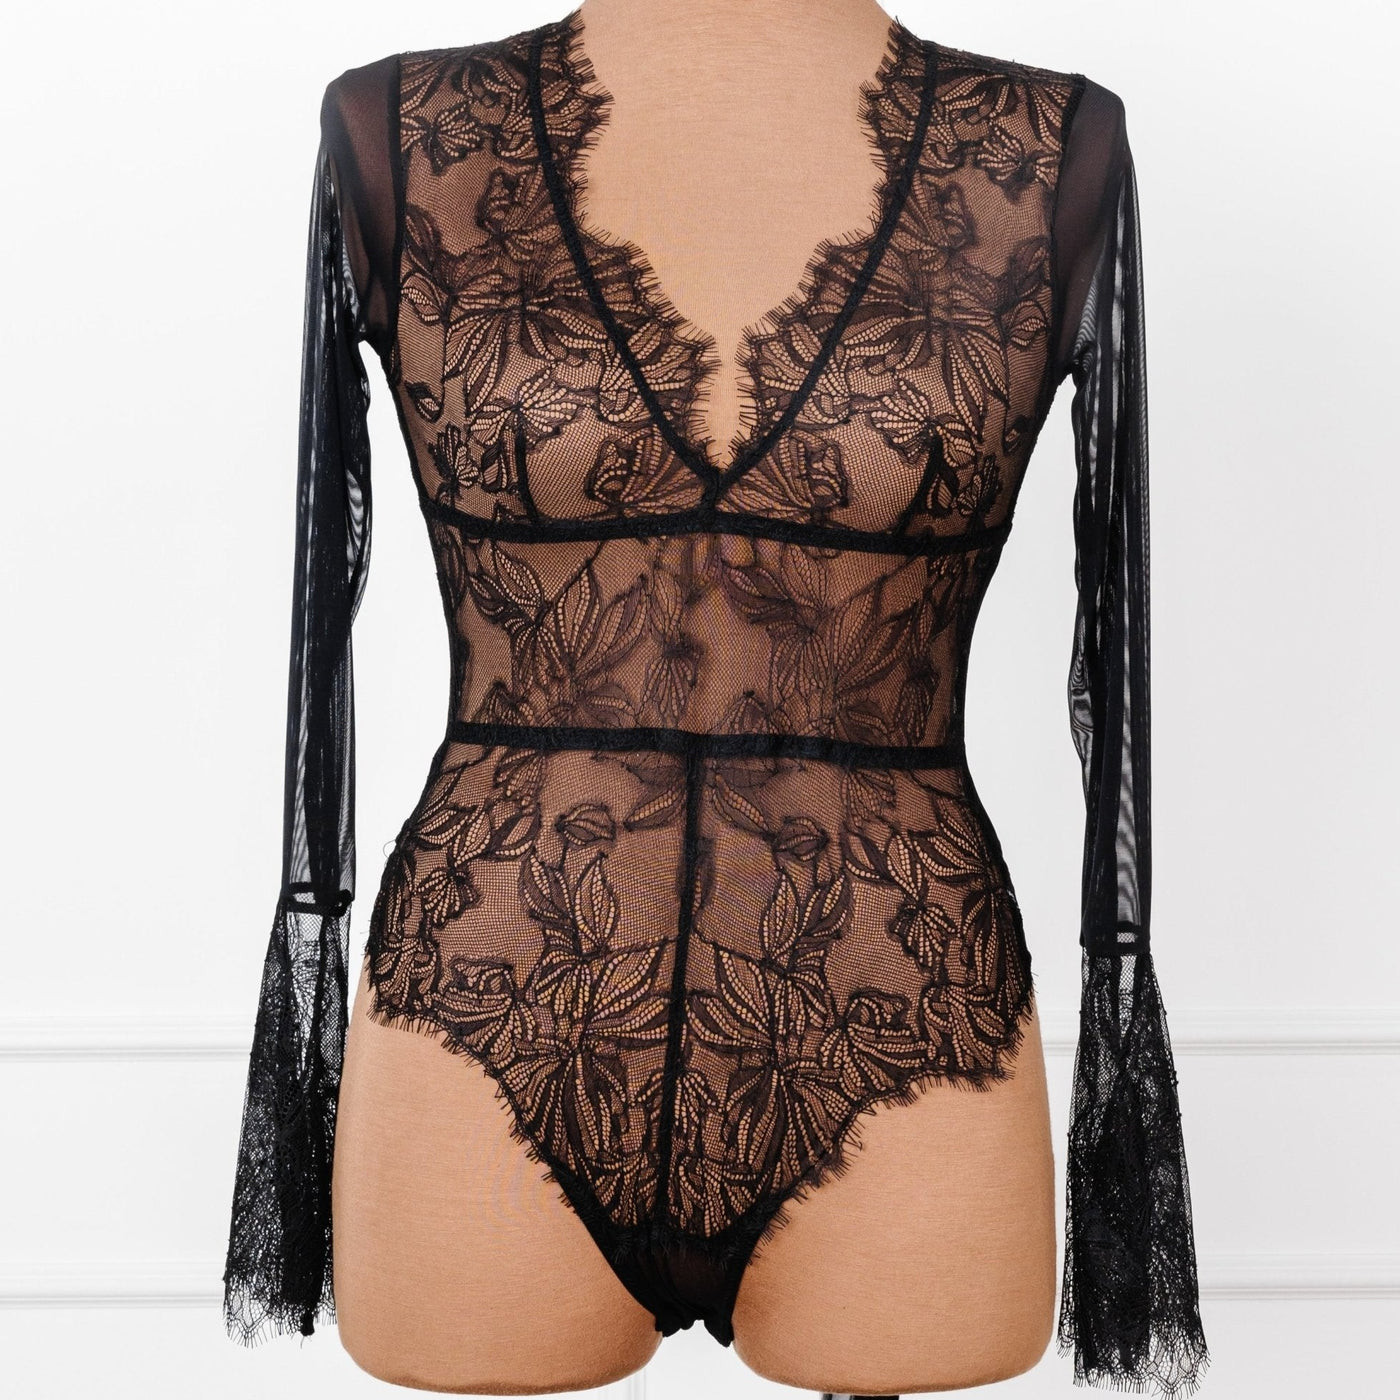 Black OPAQUE LONG SLEEVE TEDDY Snap Crotch BODYSUIT Full Back LACE